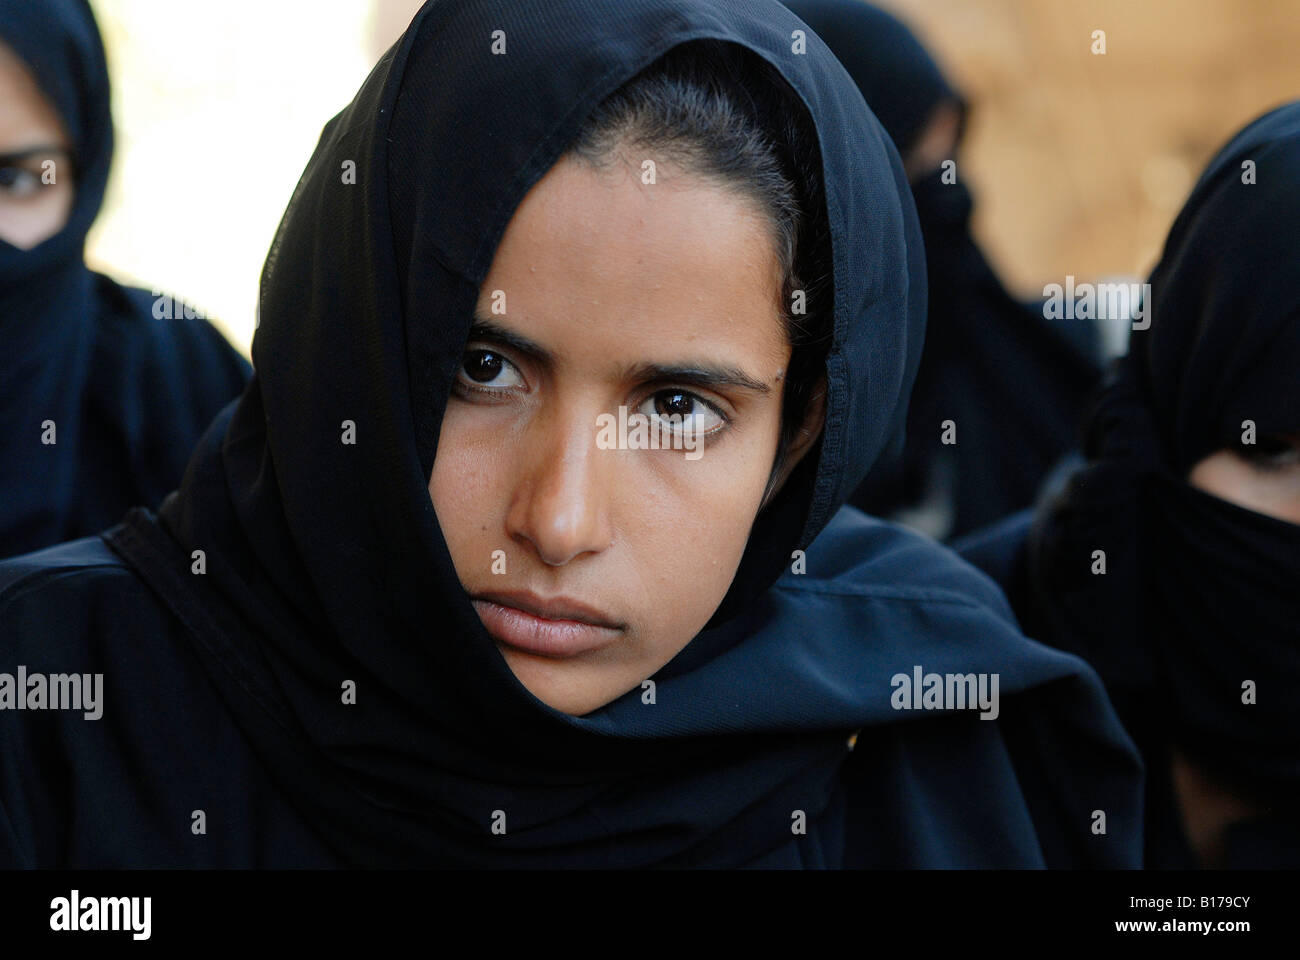 a-beautiful-bedouin-woman-in-sinai-showing-her-whole-face-uncovered-B179CY.jpg